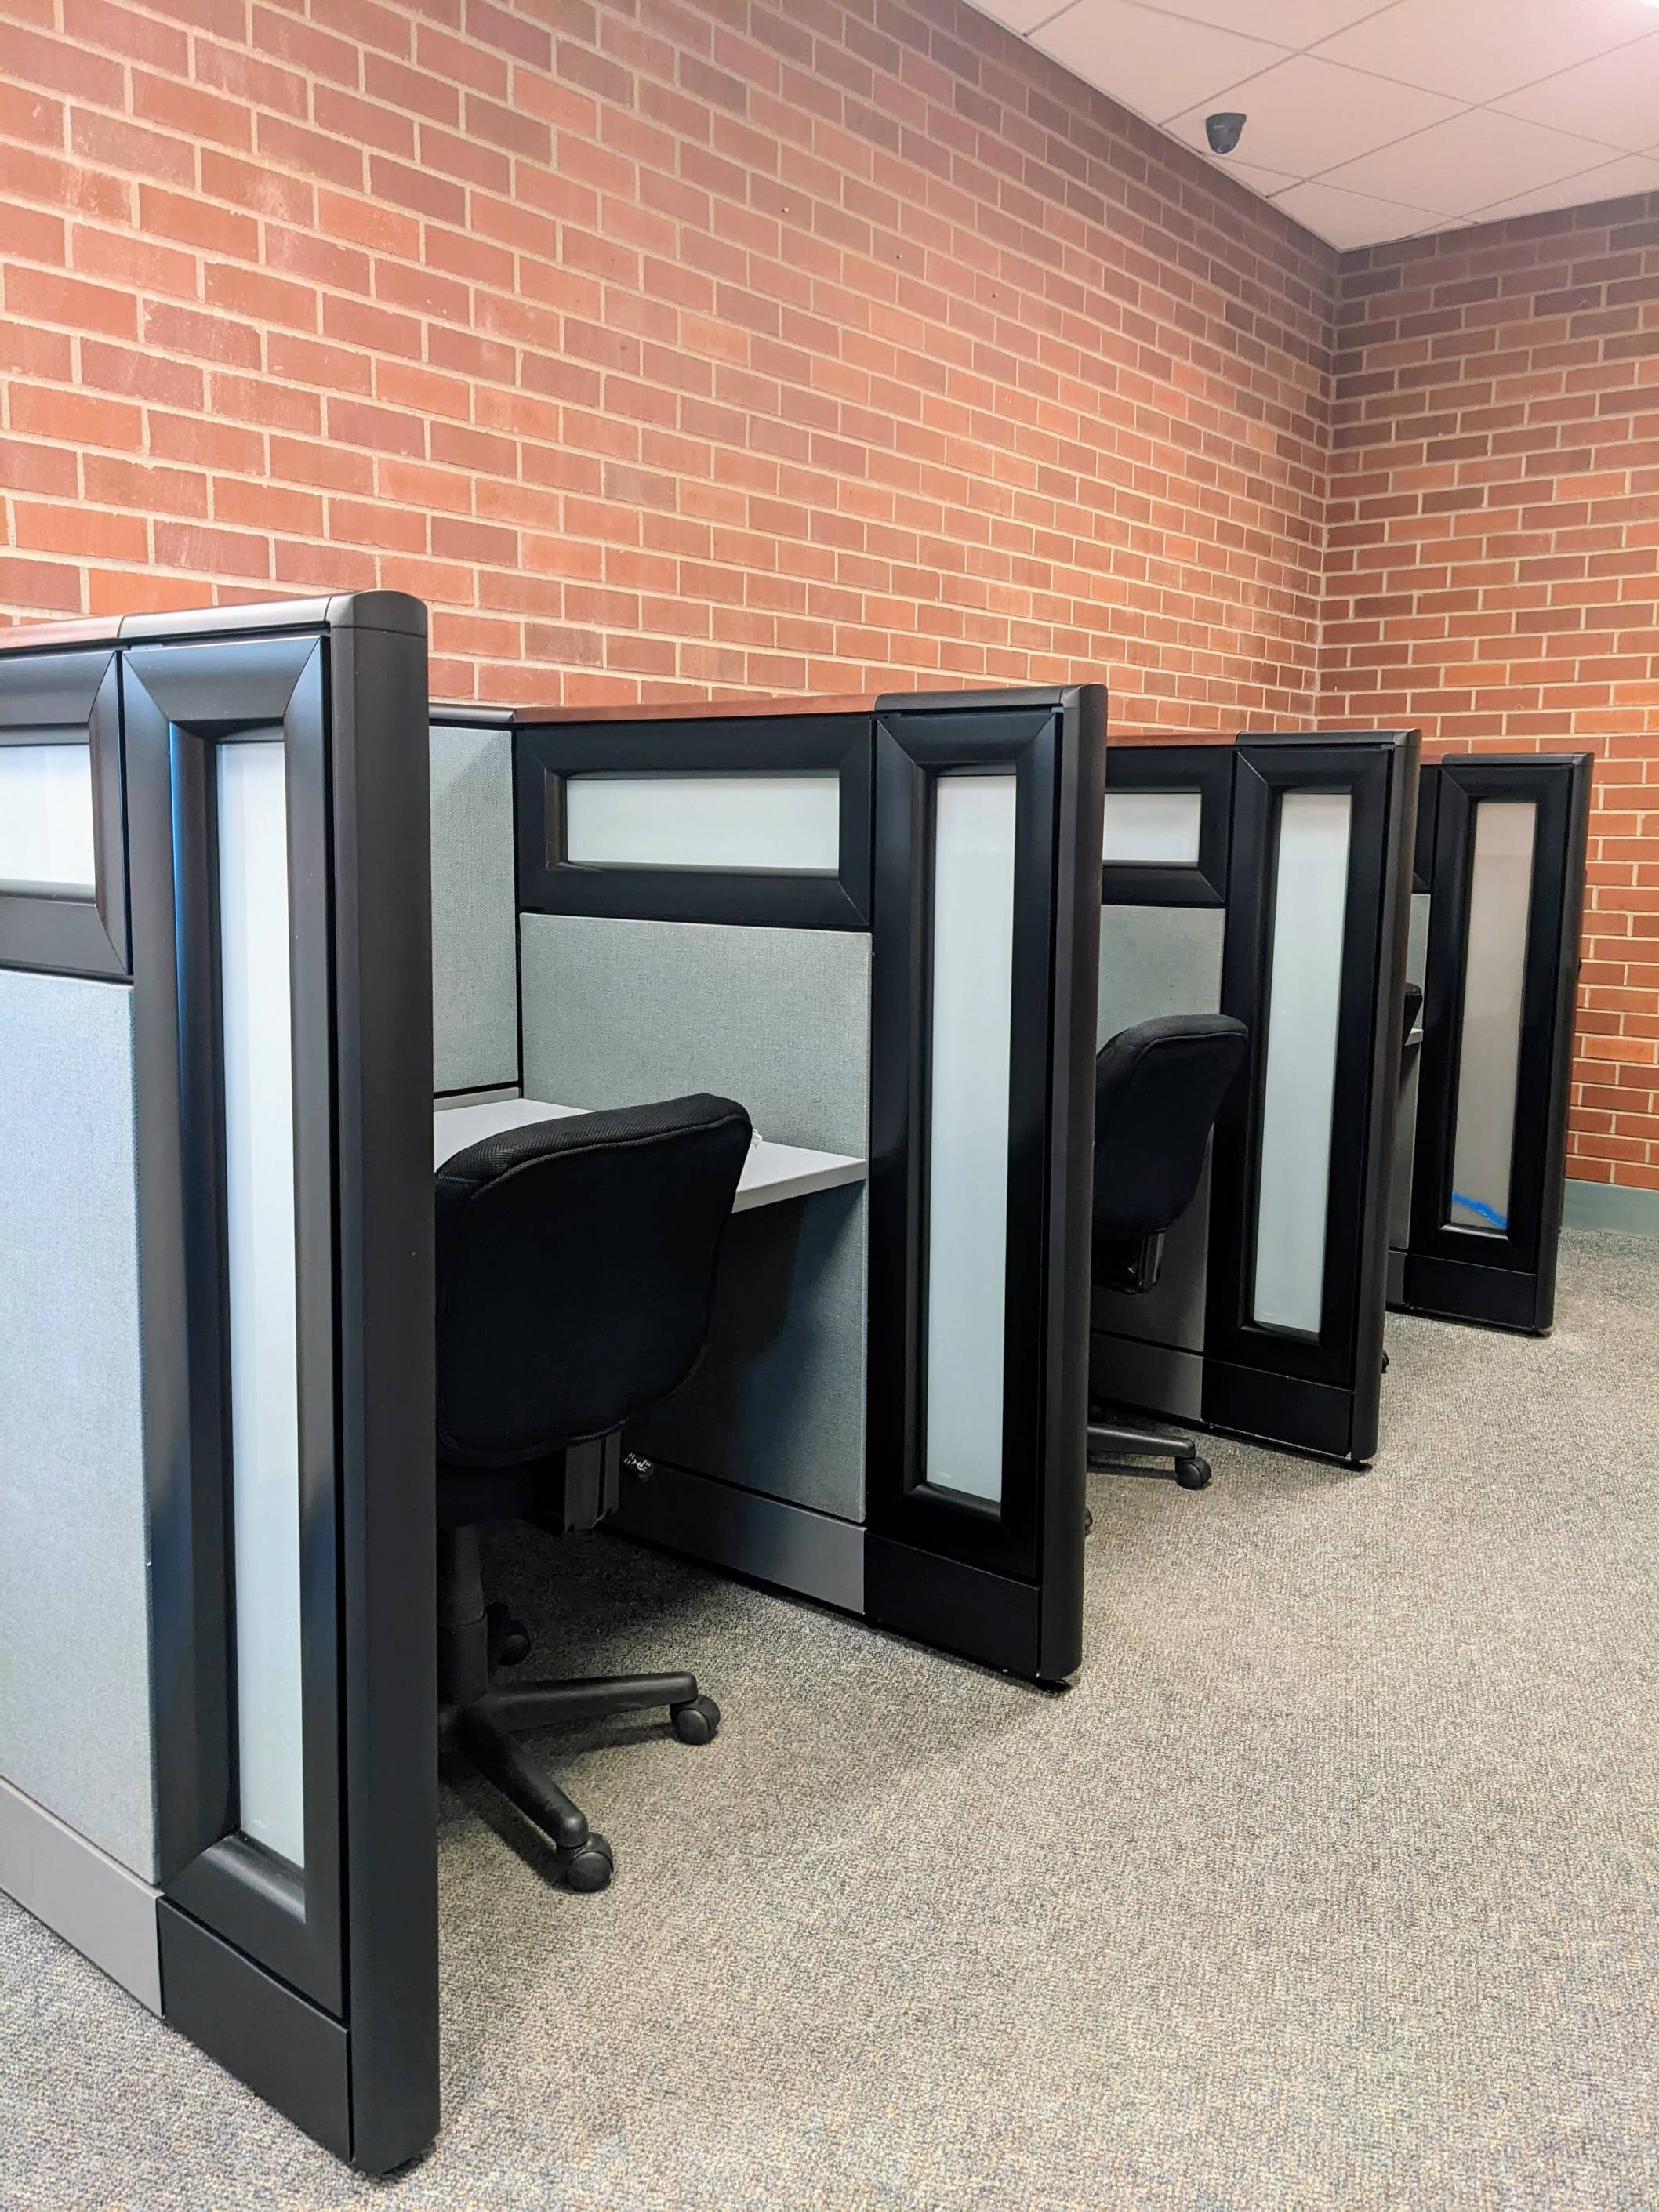 Distraction Reduced testing area -three cubicles with rolling chairs